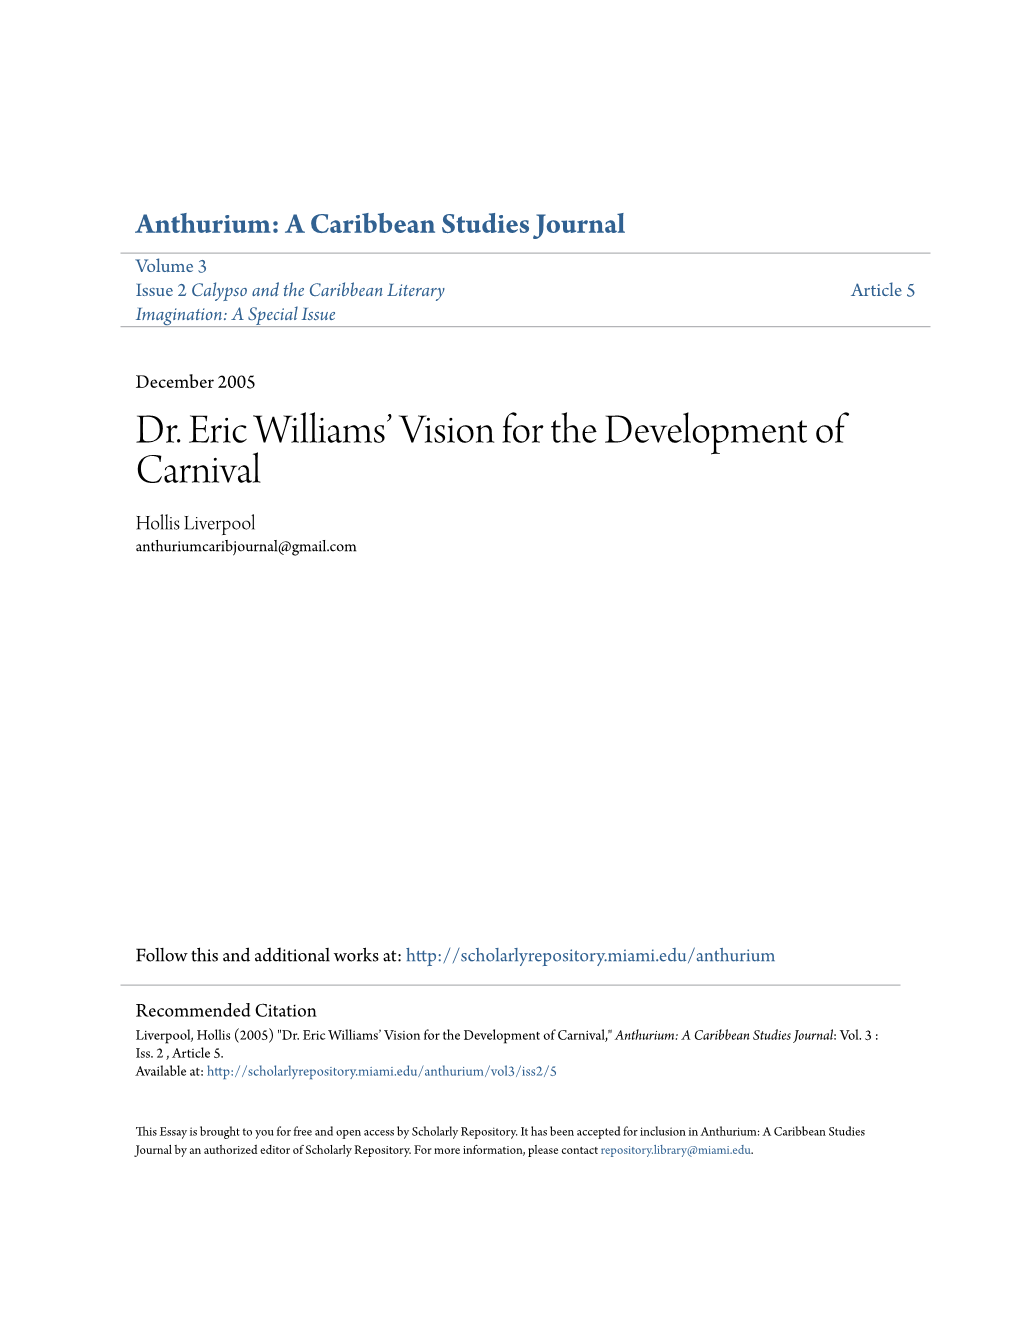 Dr. Eric Williamsâ•Ž Vision for the Development of Carnival